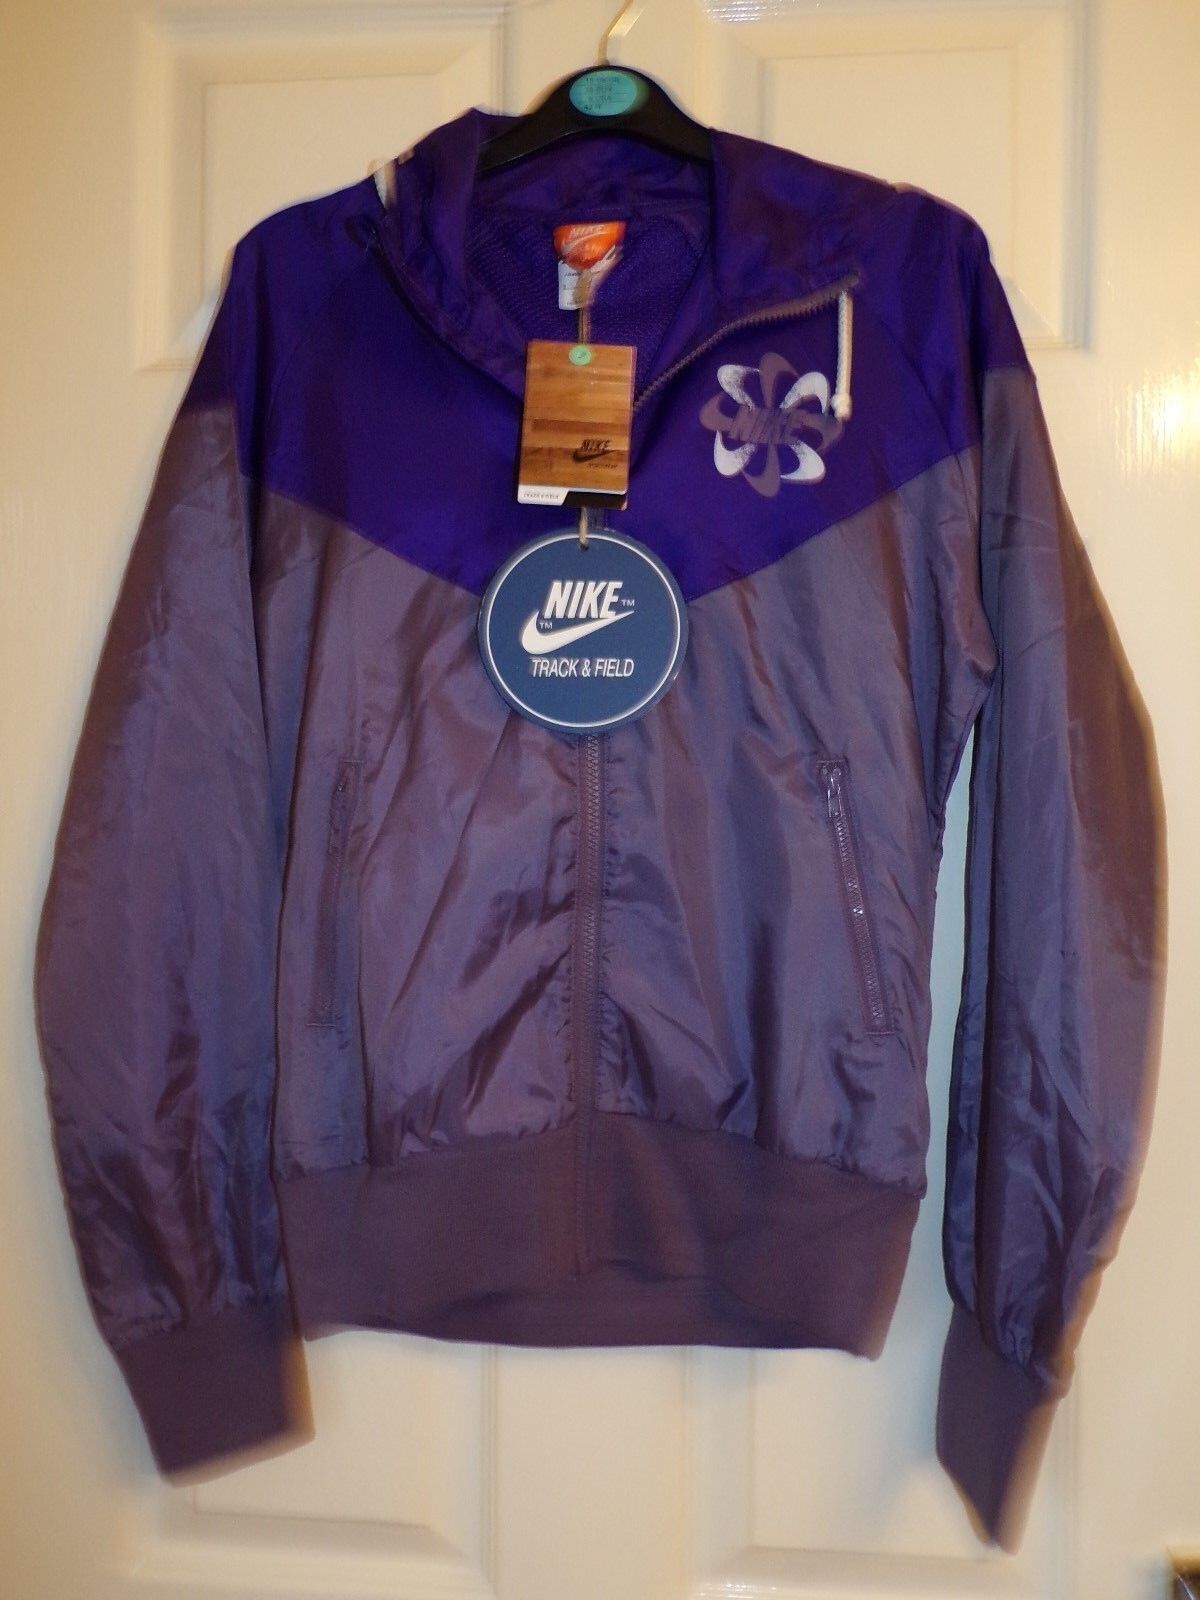 BNWT NIKE TRACK unisex & FIELD RETRO JACKET 8 UK £74.99 TRAINING RRP Inventory cleanup selling sale